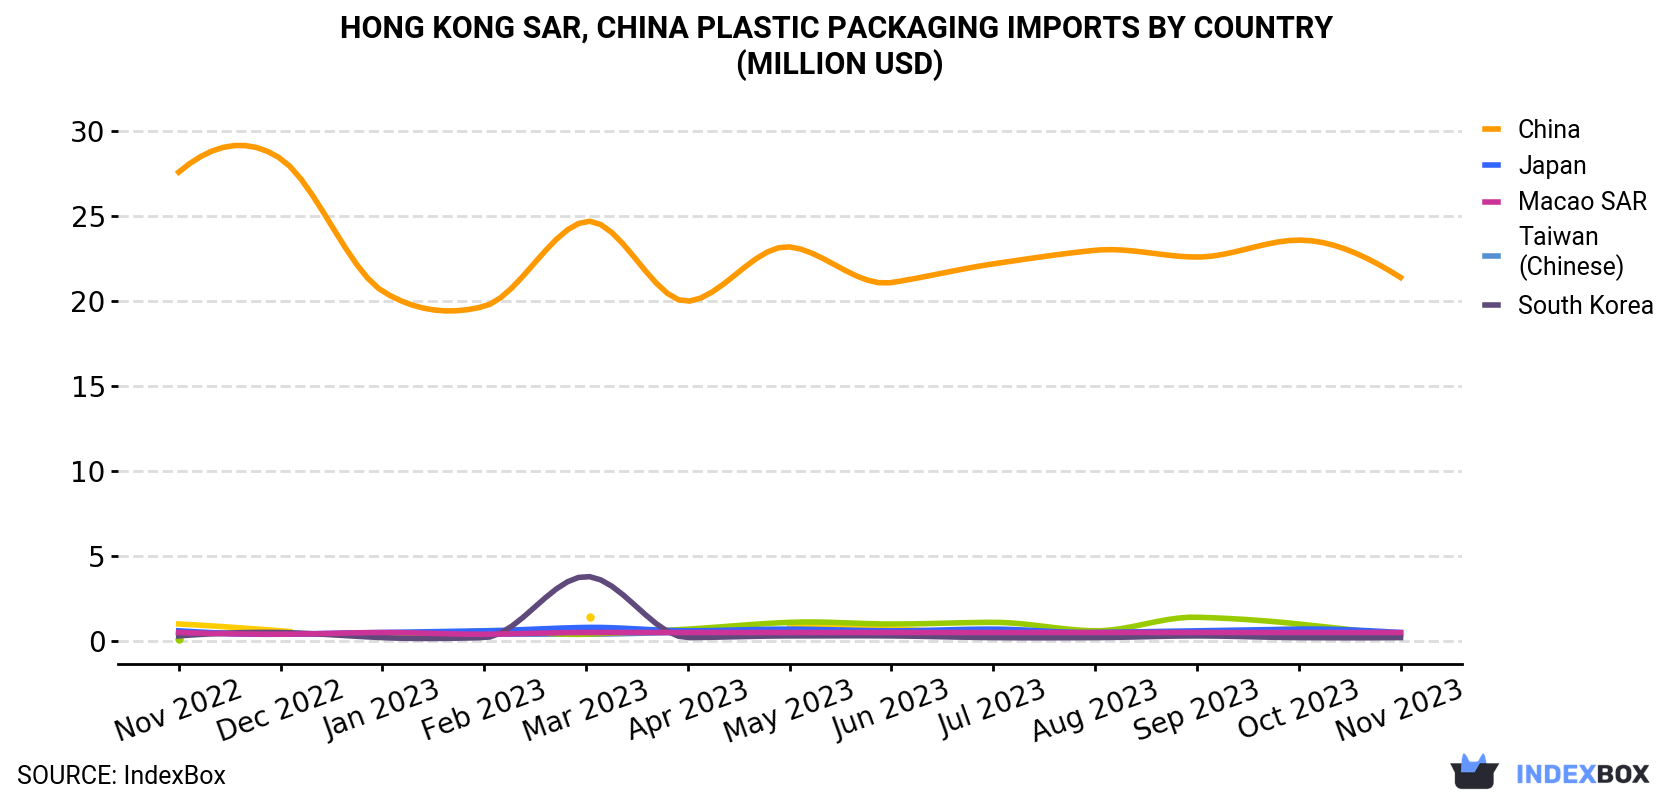 Hong Kong Plastic Packaging Imports By Country (Million USD)